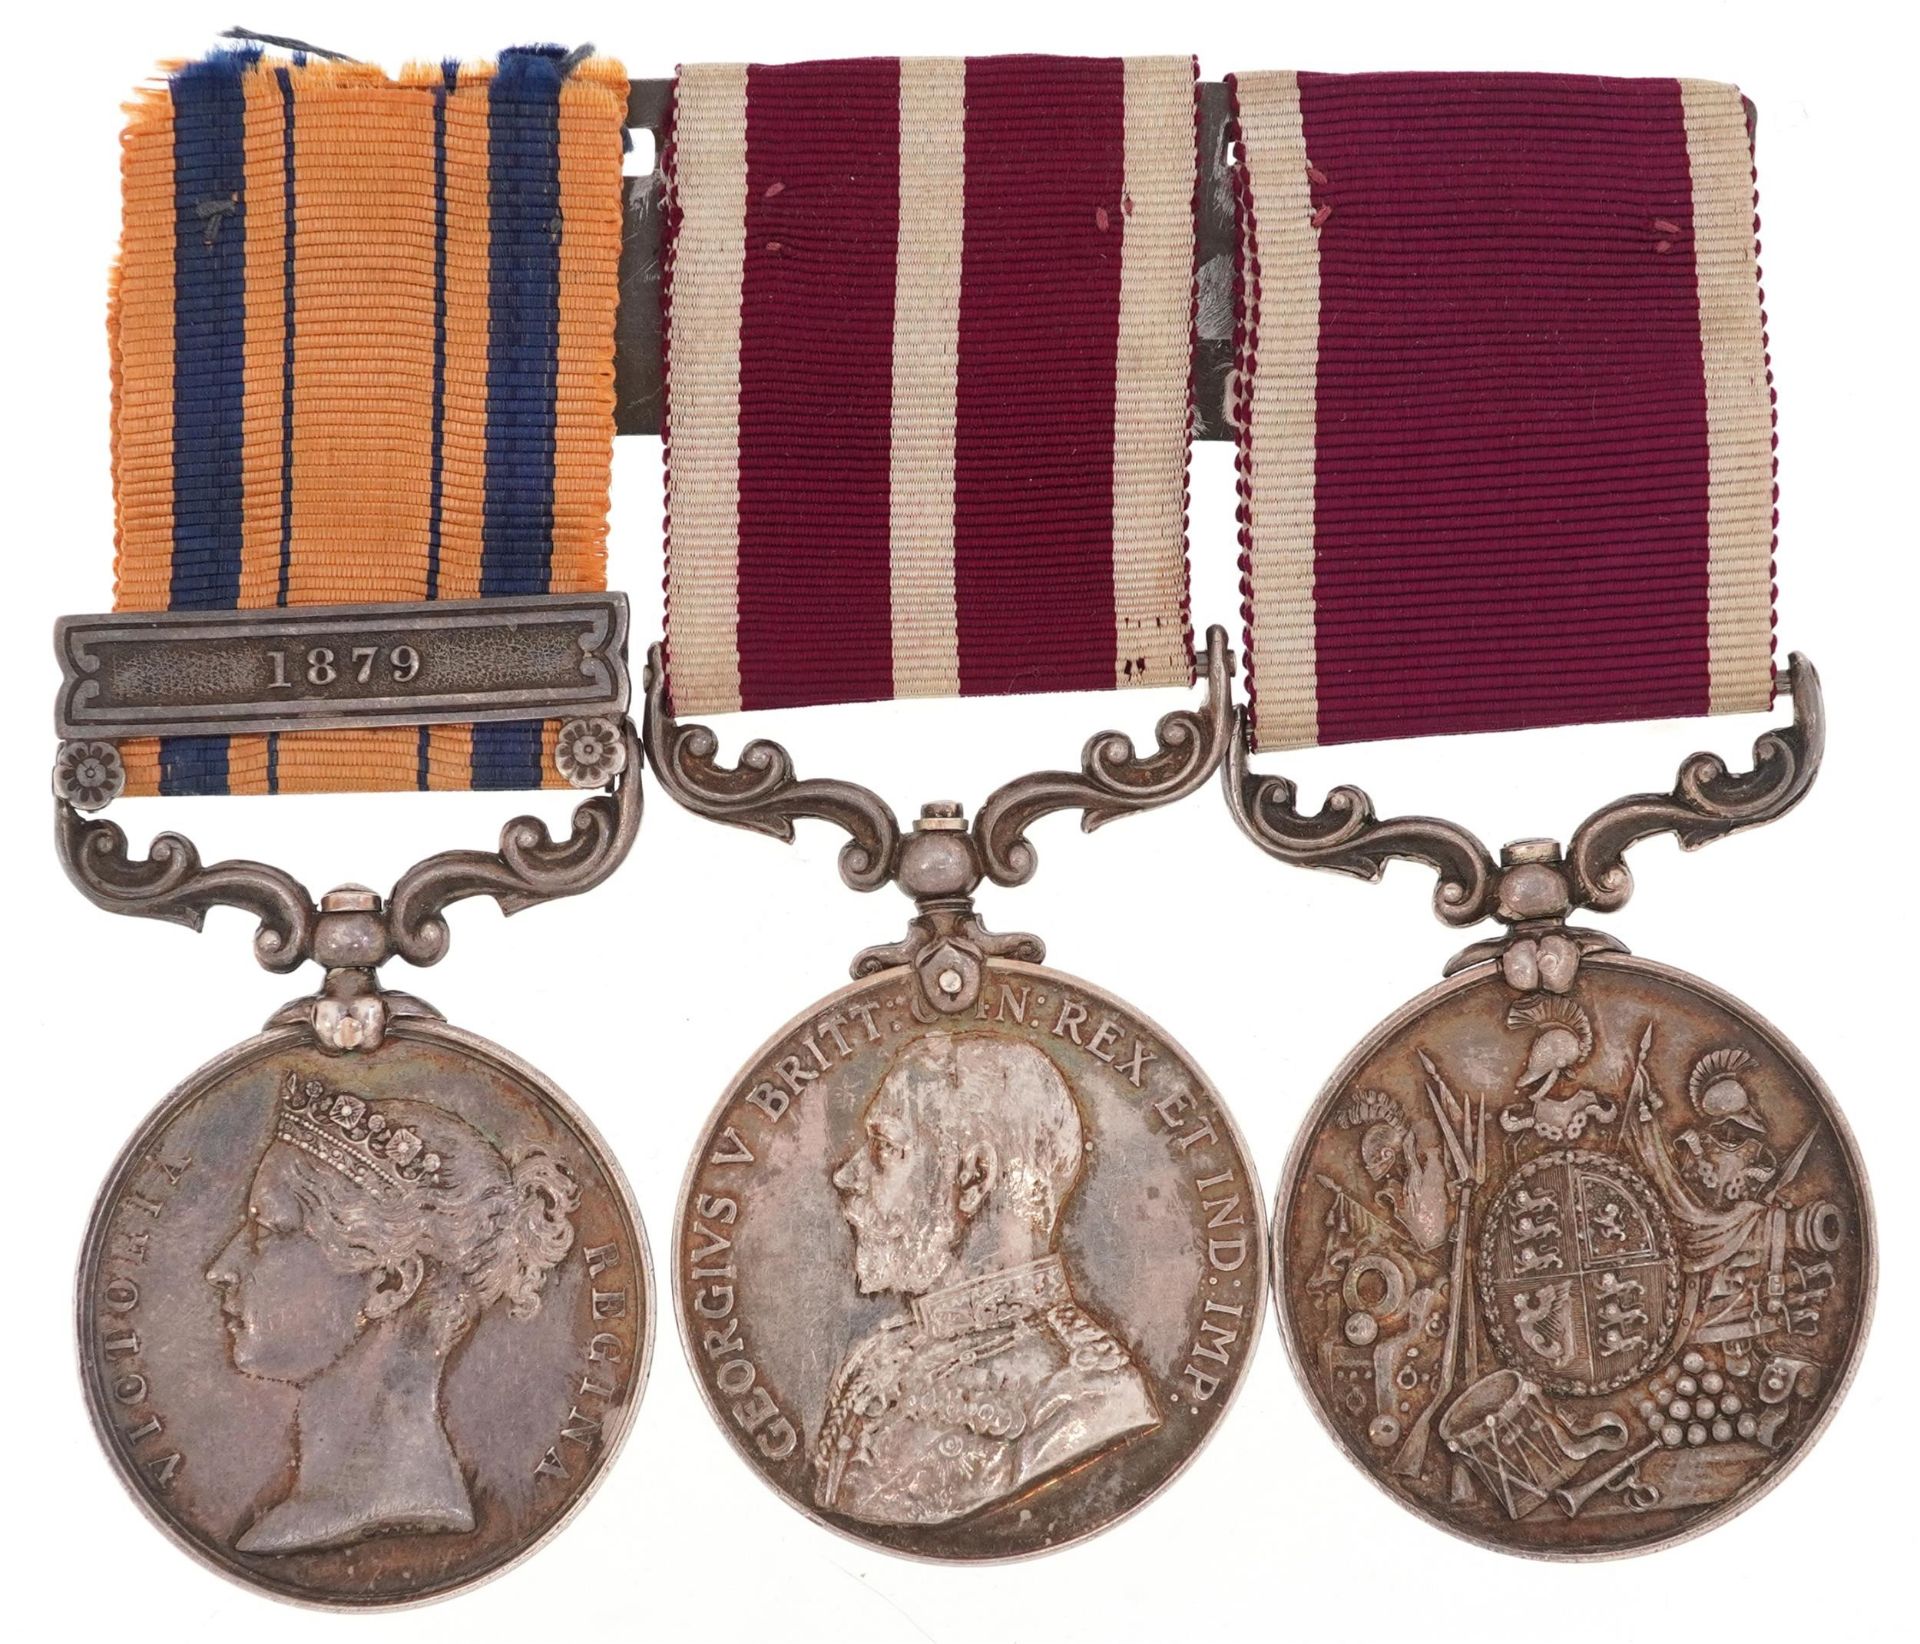 Victorian British military medal group with Meritorious Service, Long Service and Good Conduct - Image 2 of 8